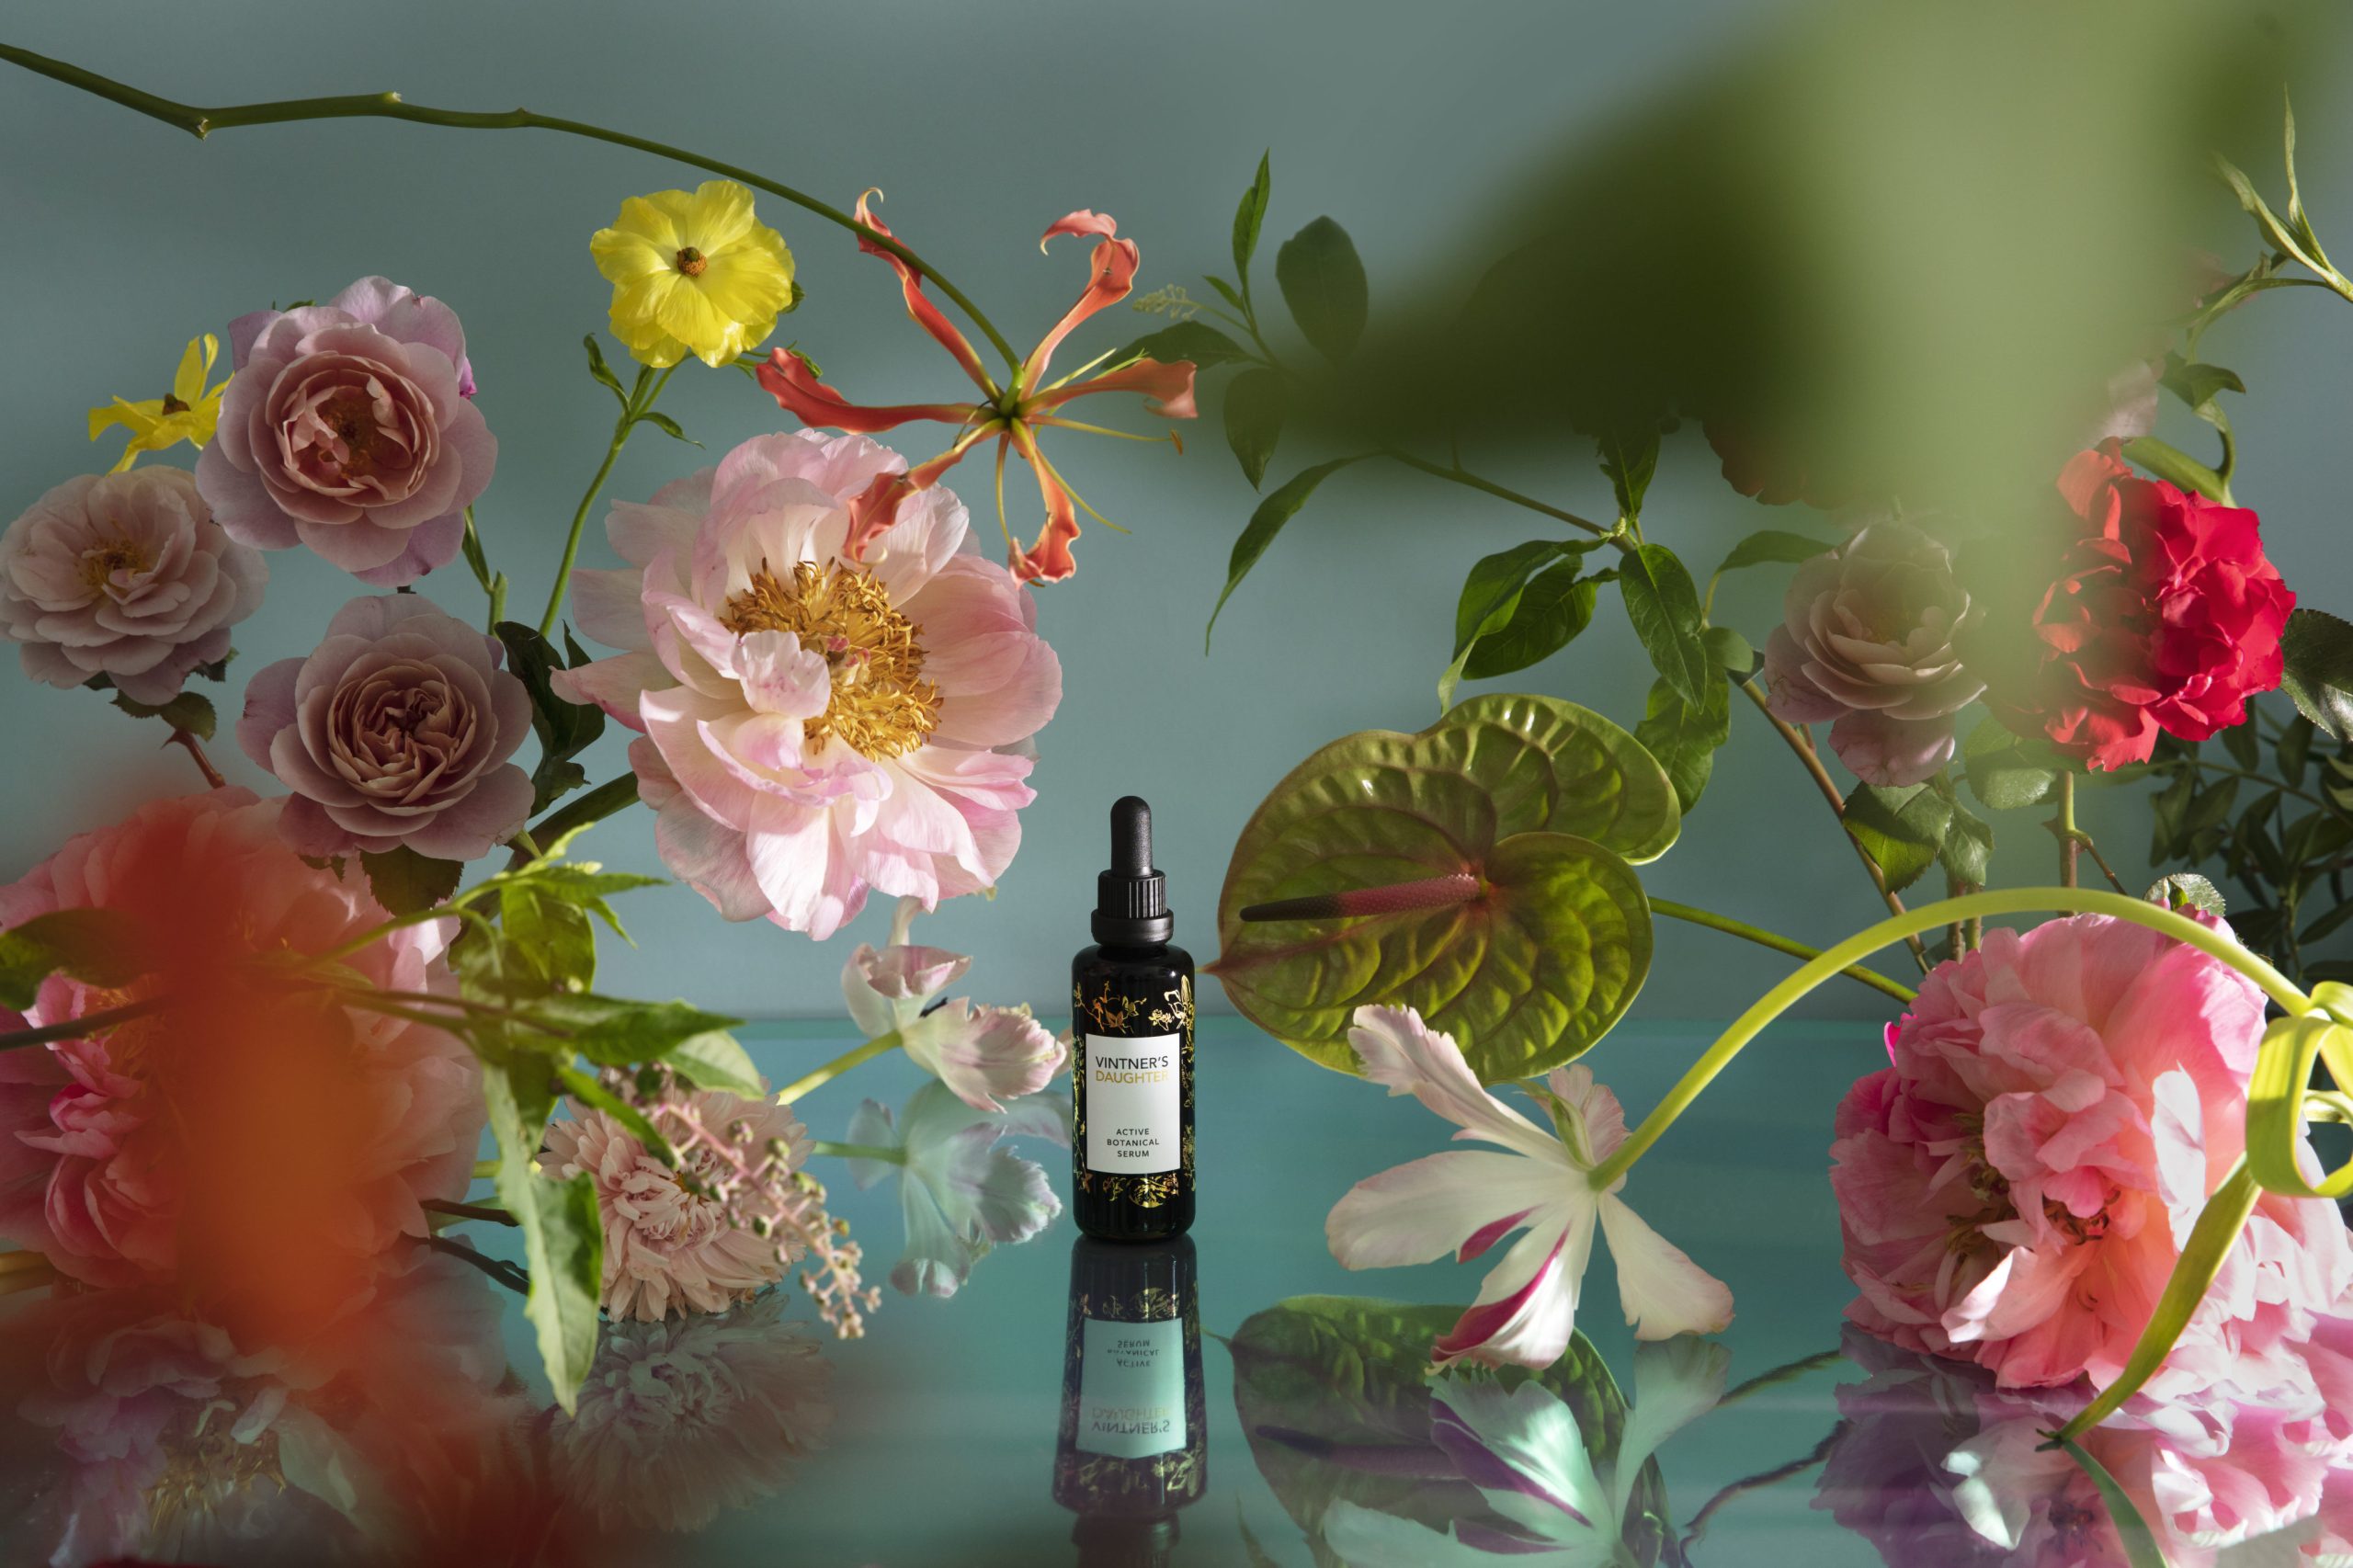 a-limited-edition-of-celeb-fave-vintner’s-daughter-serum-+-more-beauty-news